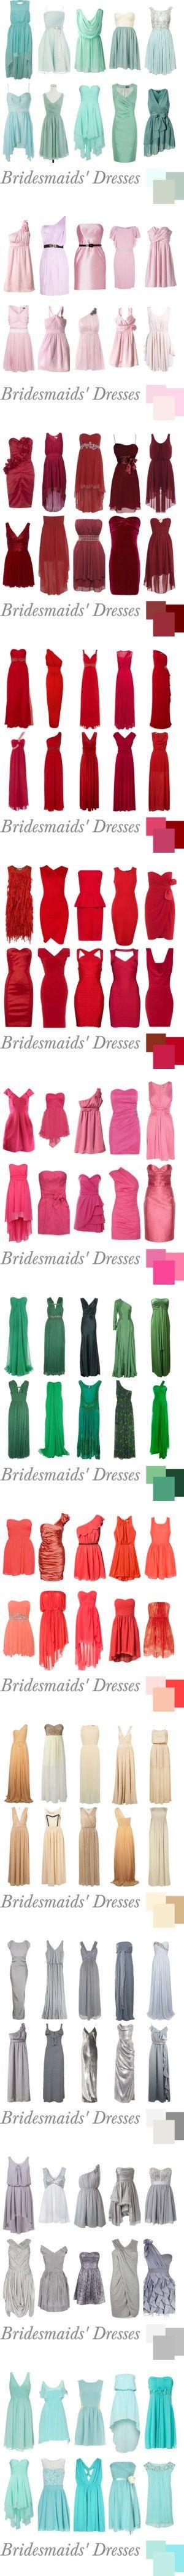 Hochzeit - Bridesmaids-What Look Are You Shooting For? - Weddingbee